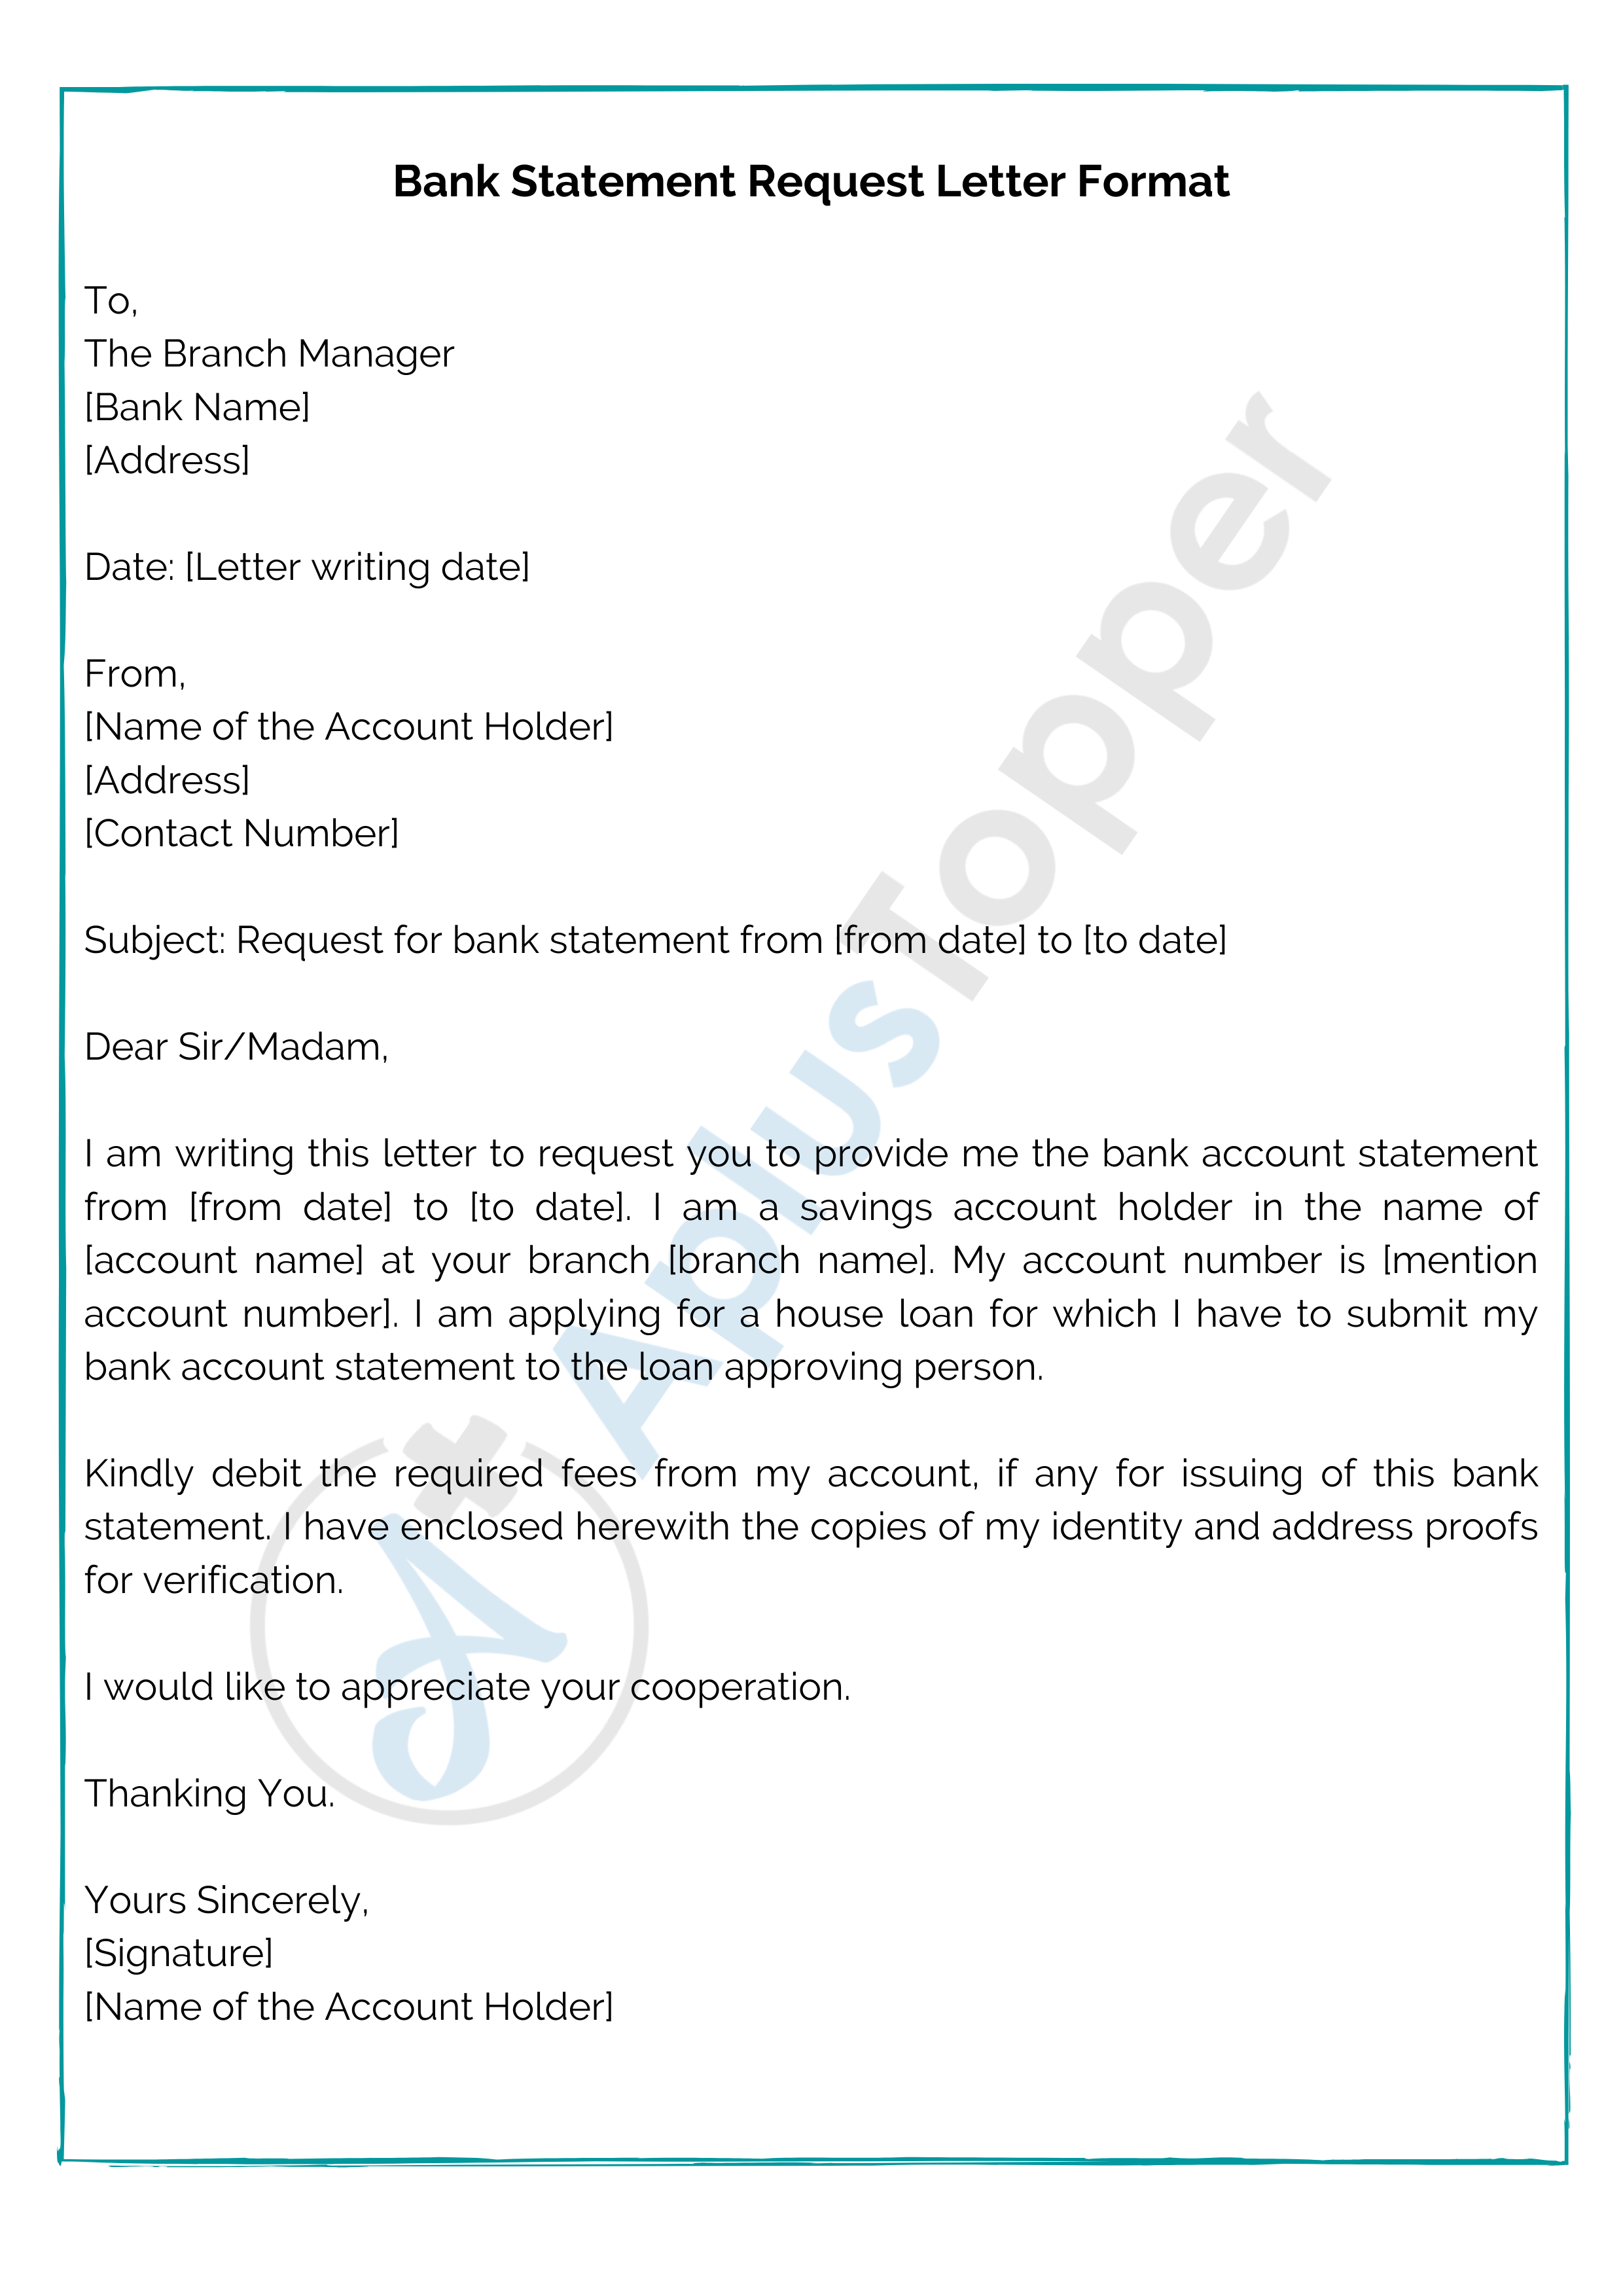 how to write letter to bank requesting for bank statement